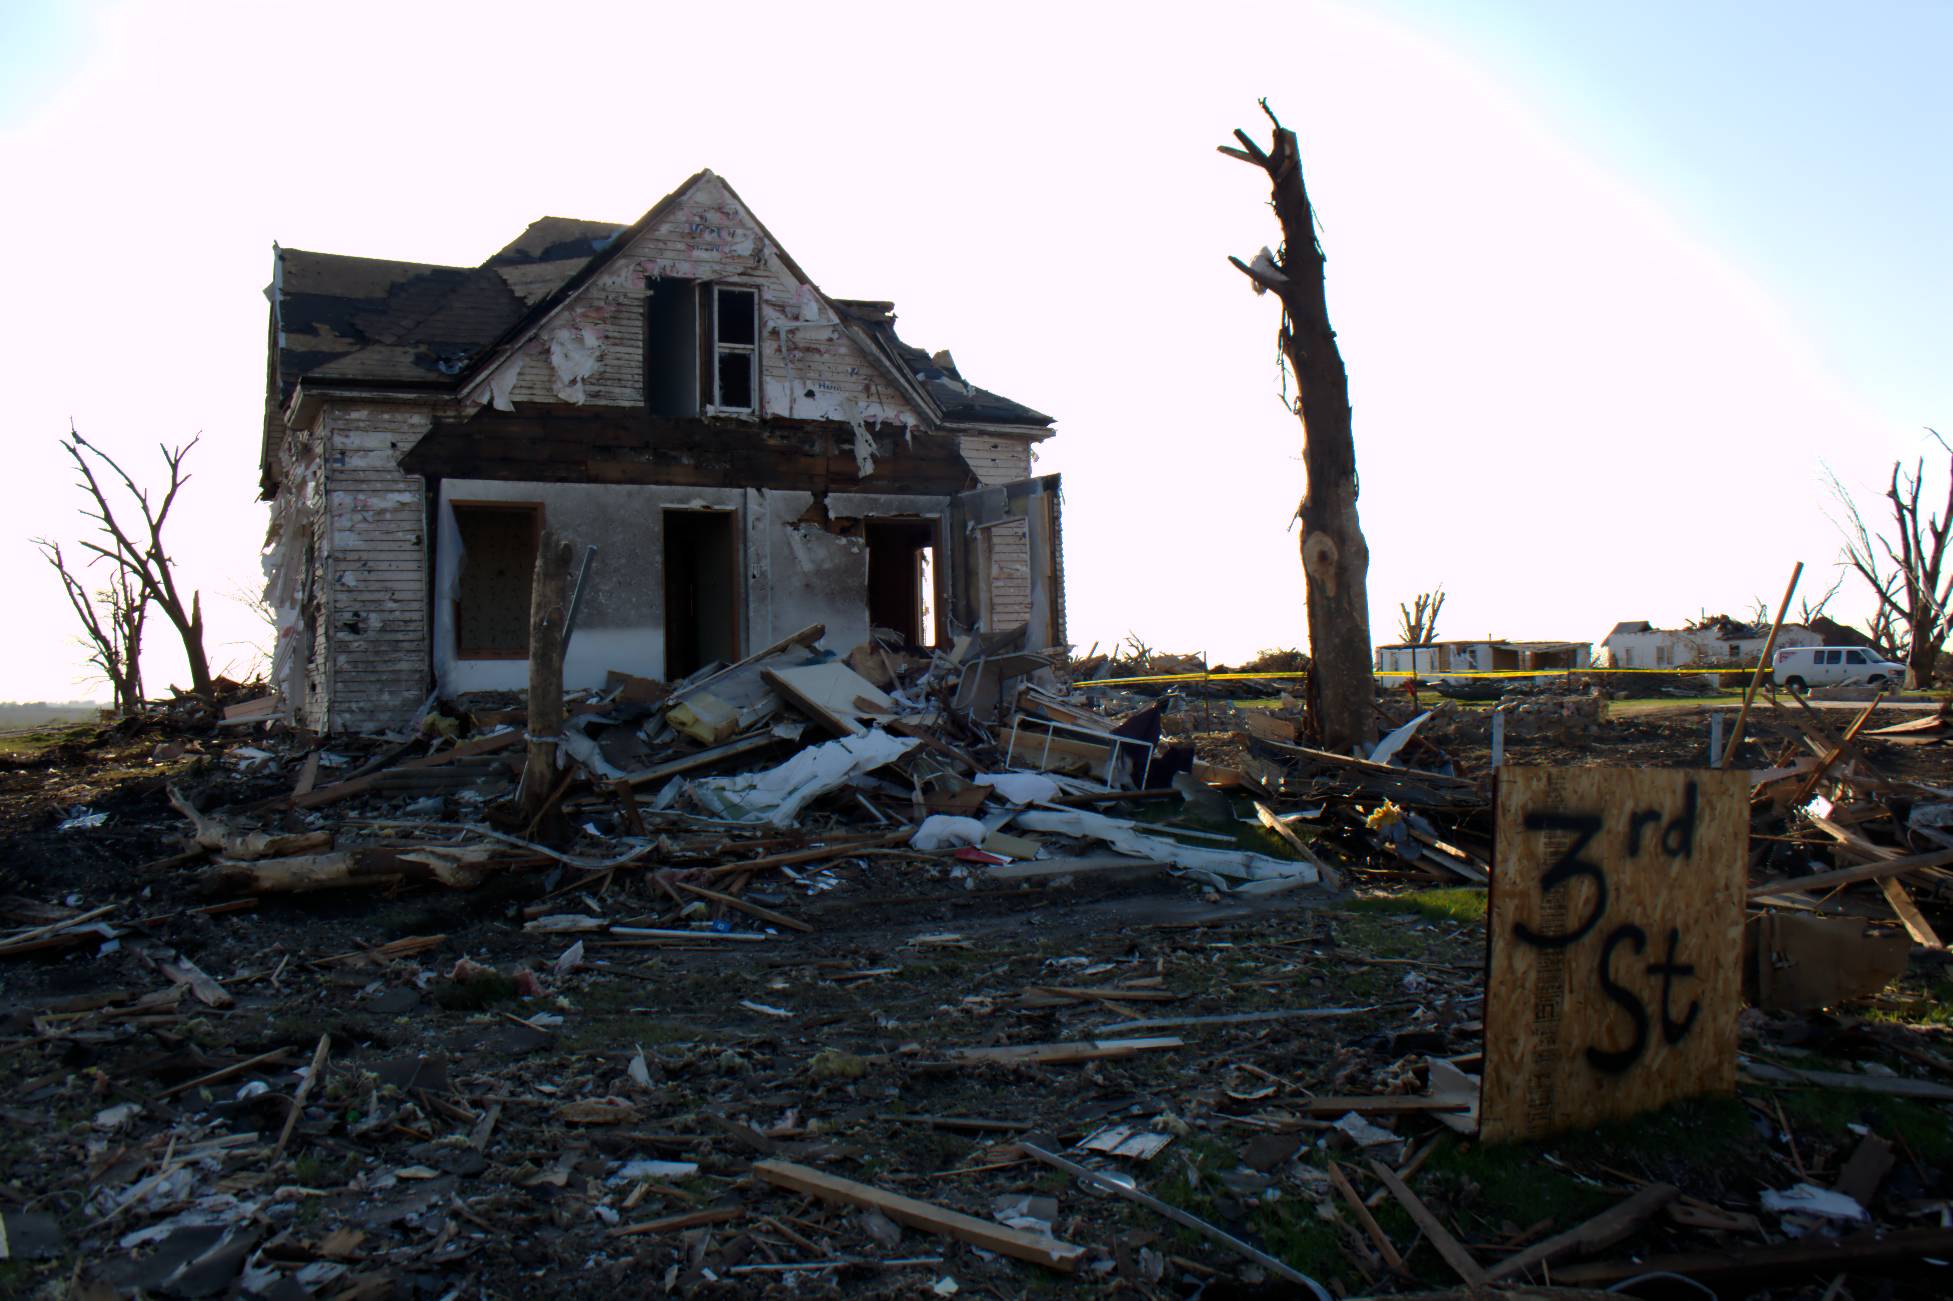 Photograph of a house in Iowa that was damaged by a tornado. The photo shows a house with no windows and doors and damaged siding. The landscape around the house is covered in debris. A particleboard sign in front of the house has "3rd St" spray-painted on it. A tree in front of the house has been stripped of all its branches.